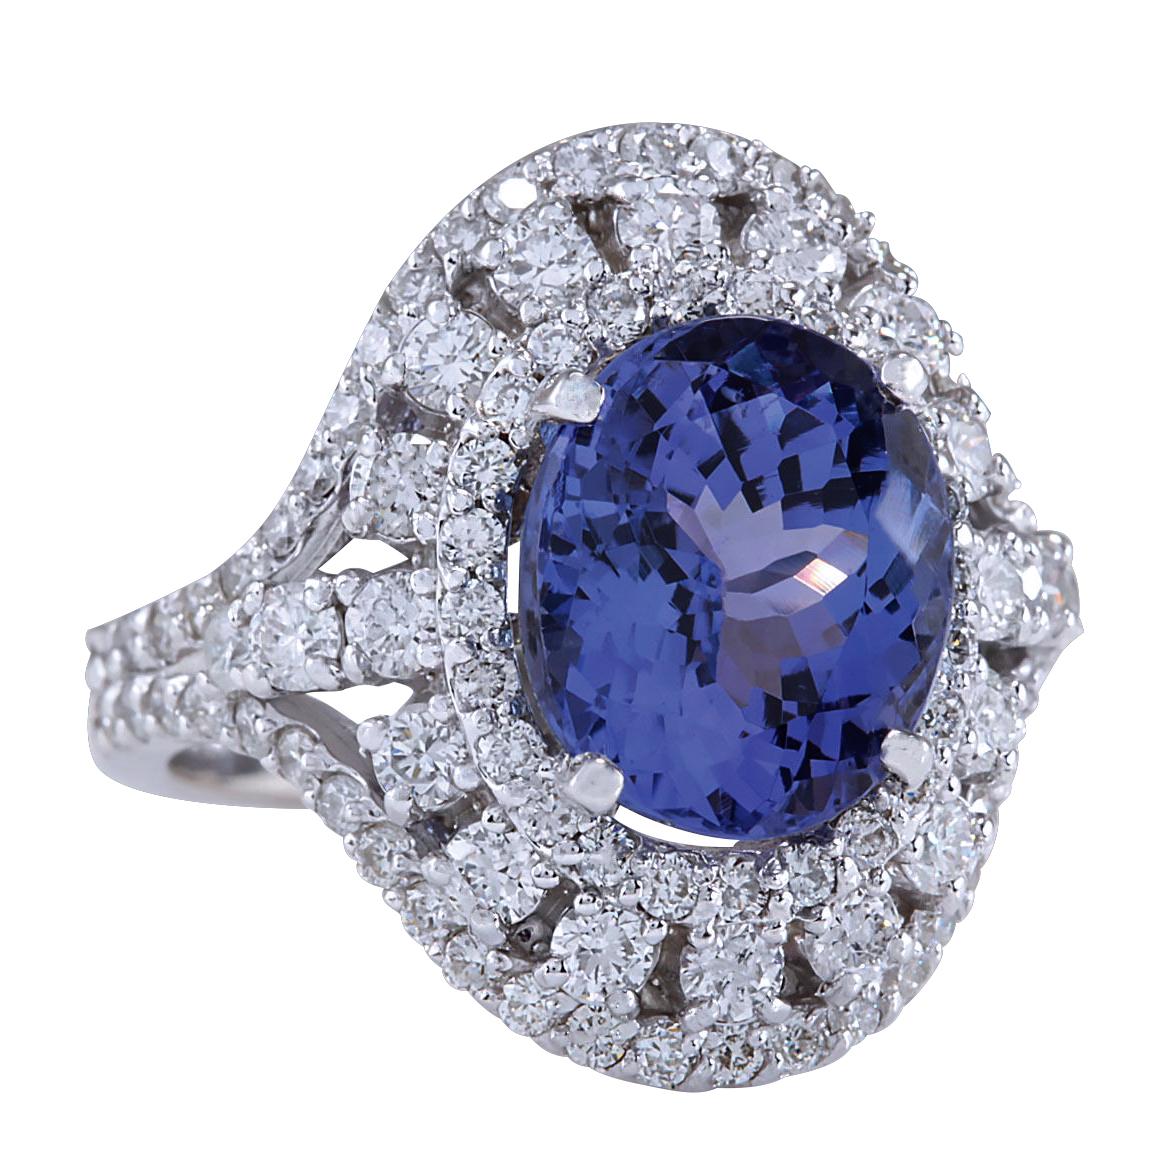 Introducing our magnificent 6.46 Carat Tanzanite 14 Karat White Gold Diamond Ring. Crafted from stamped 14K White Gold, this ring has a total weight of 8.0 grams, ensuring both quality and durability. The centerpiece is a stunning tanzanite gemstone